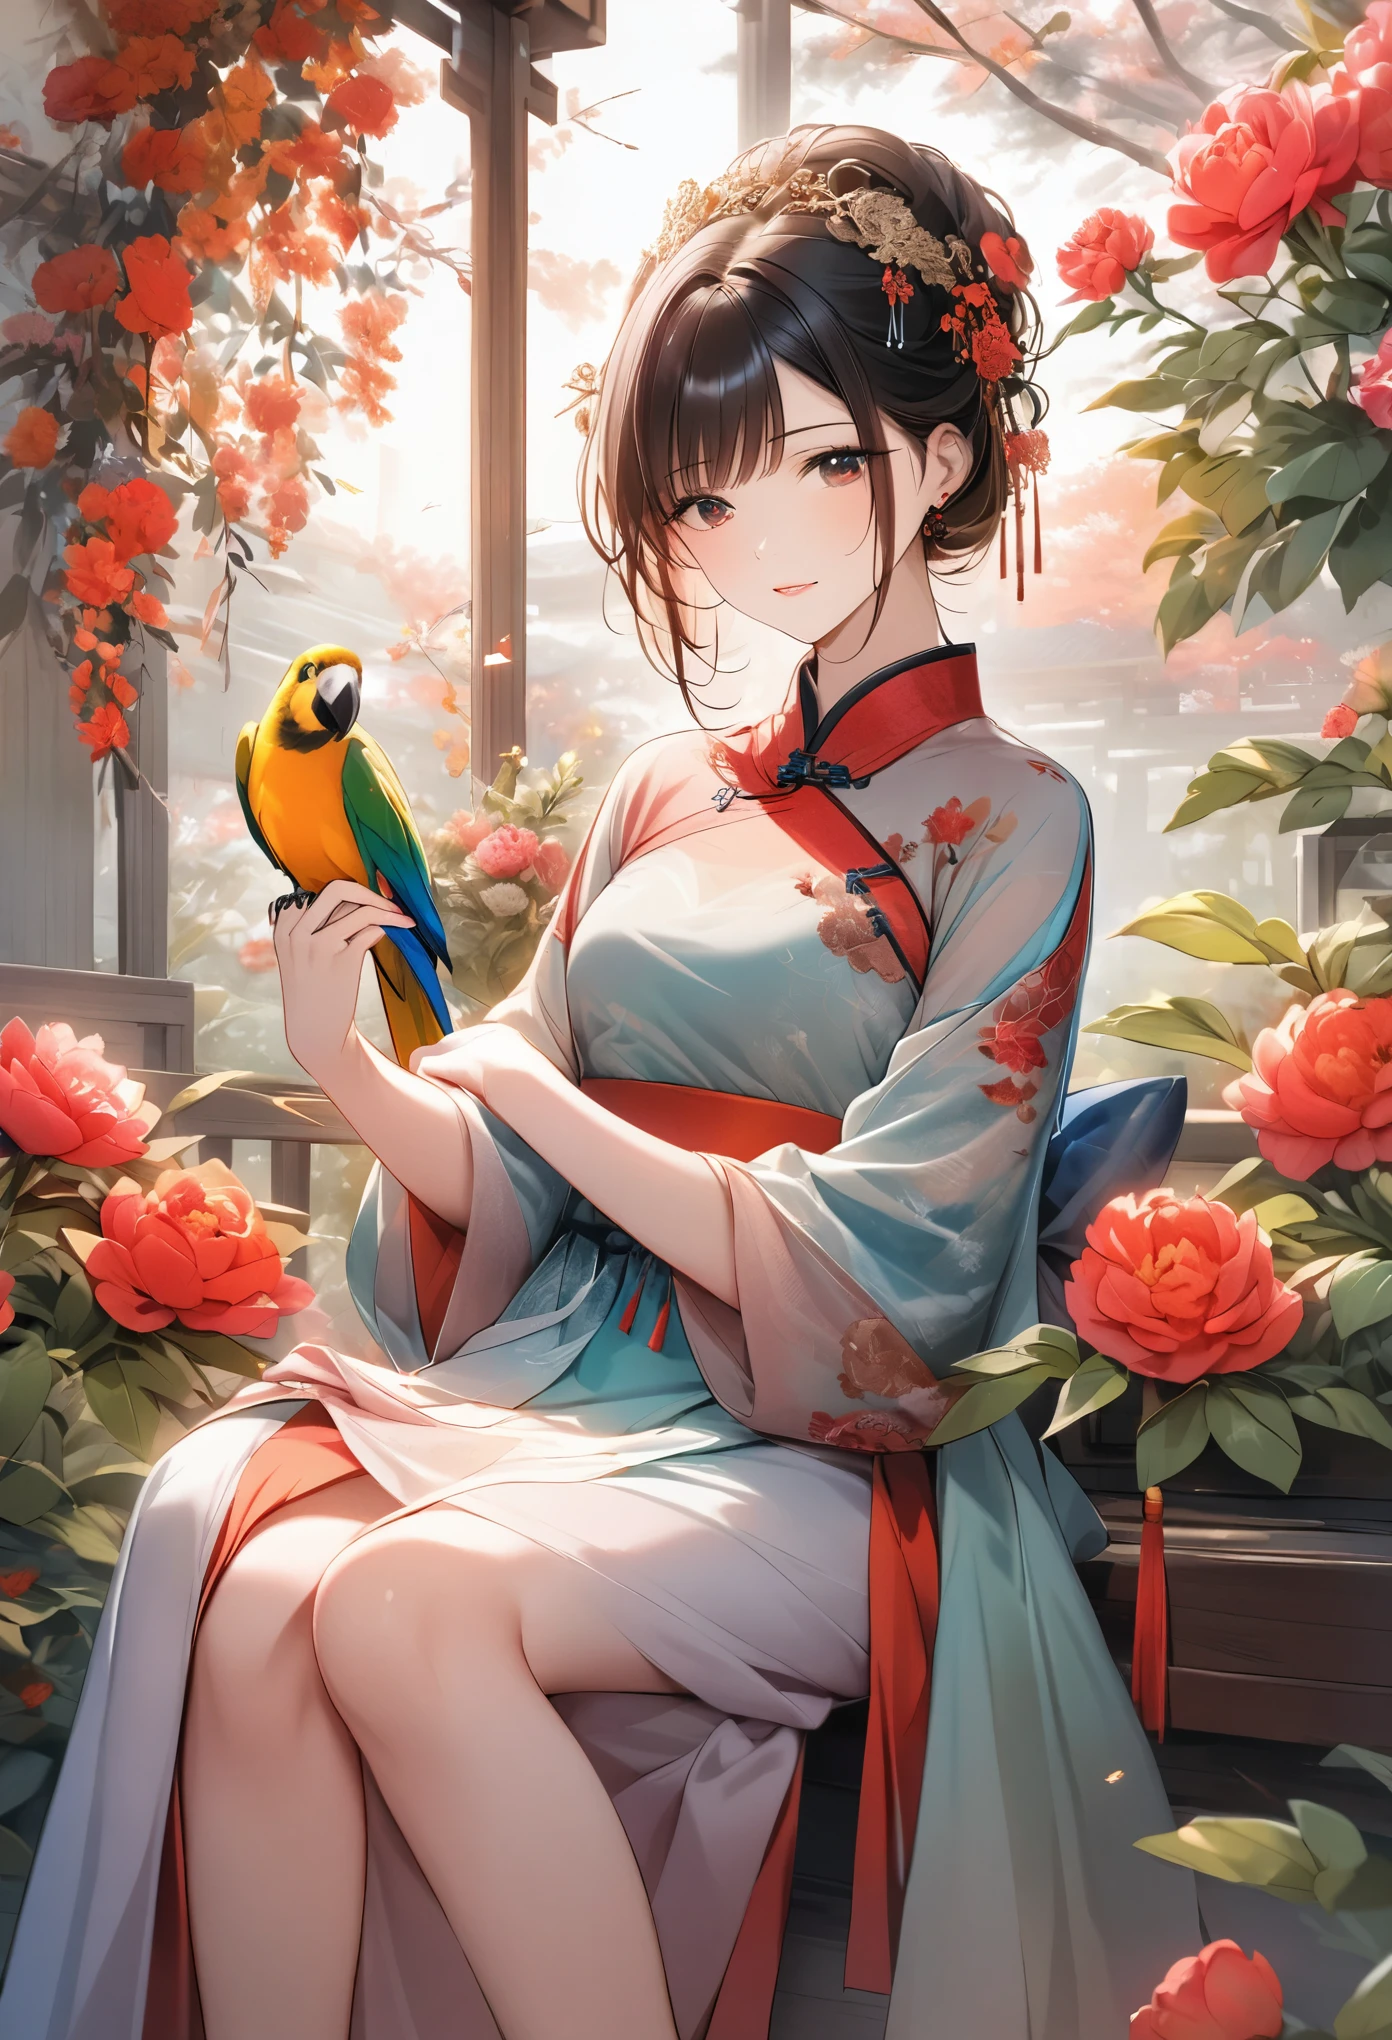 A beautiful young woman in traditional Chinese attire, surrounded by a lush garden. She is holding a parrot on her finger, gazing at it with gentle eyes. The woman's hair is styled in an elaborate updo adorned with flowers and traditional ornaments. Her dress is elegant, featuring fine silk with floral embroidery. The garden is in full bloom, with peonies and other flowers providing a backdrop. The scene captures the serenity and beauty of classical Chinese art, with a touch of nature harmony, (((Ultra-high saturation, high natural saturation, extremely bright colors)))